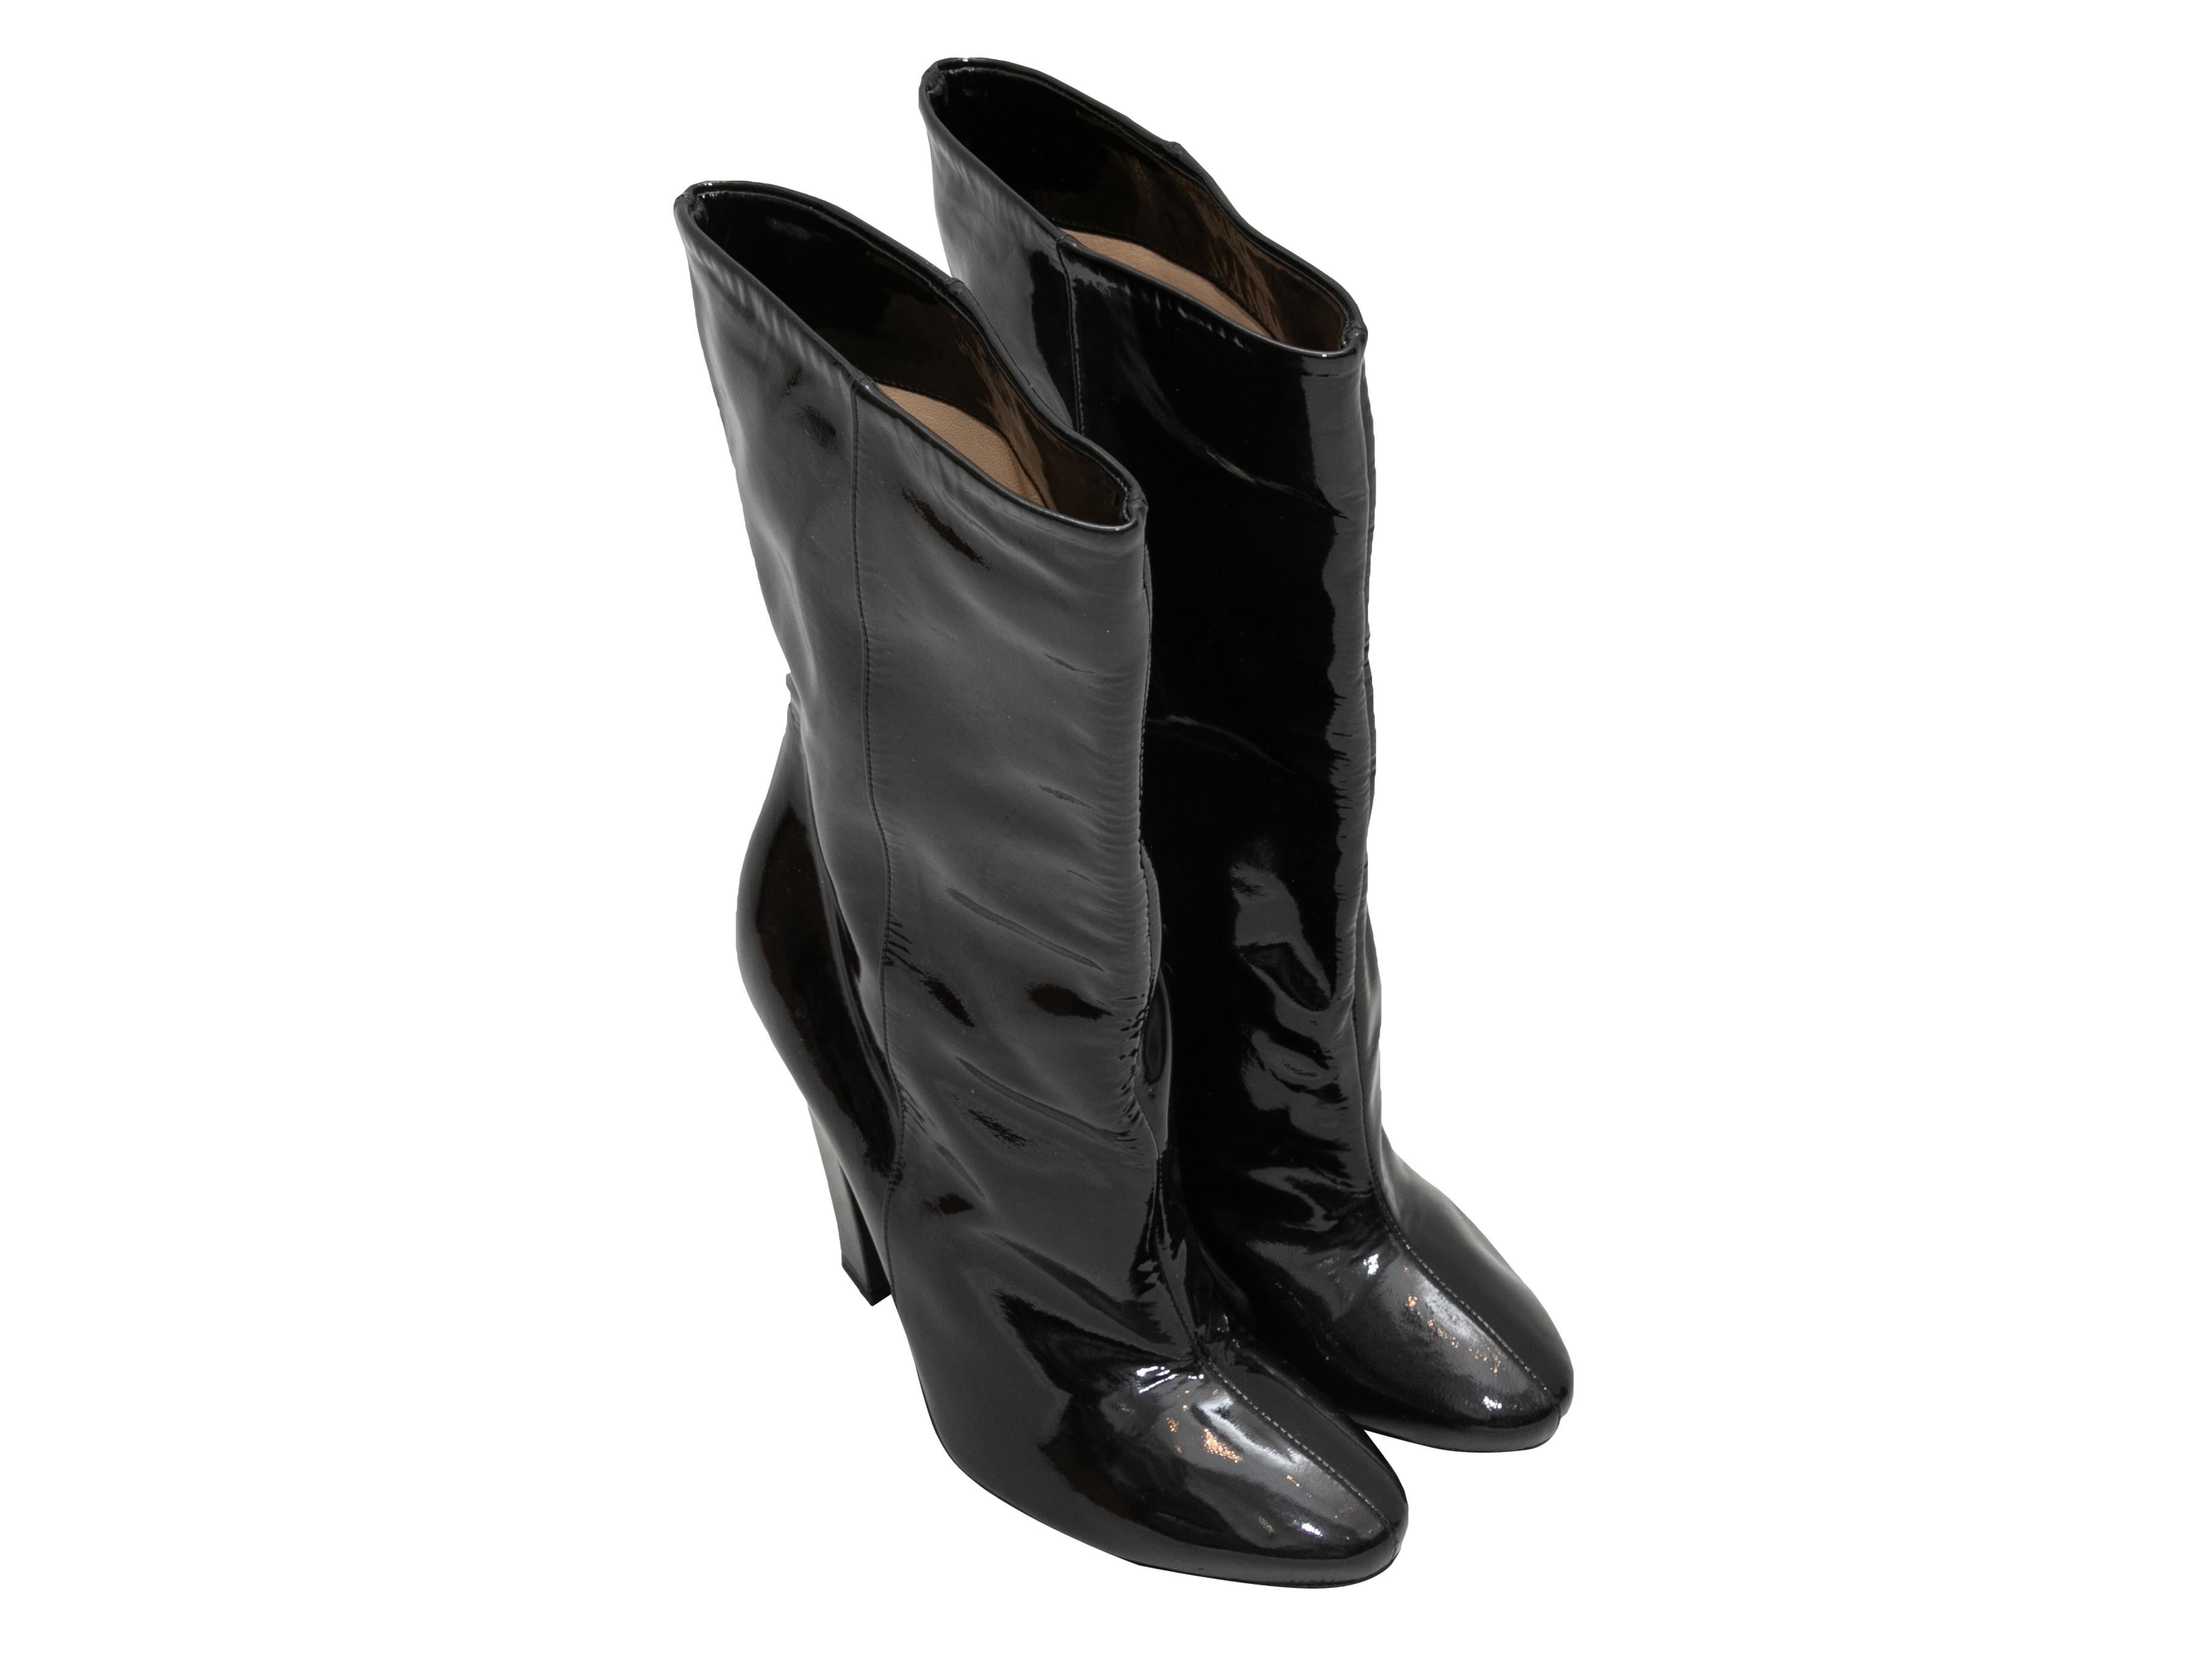 Black patent leather mid-calf boots by Jimmy Choo. Block heels. 8.25